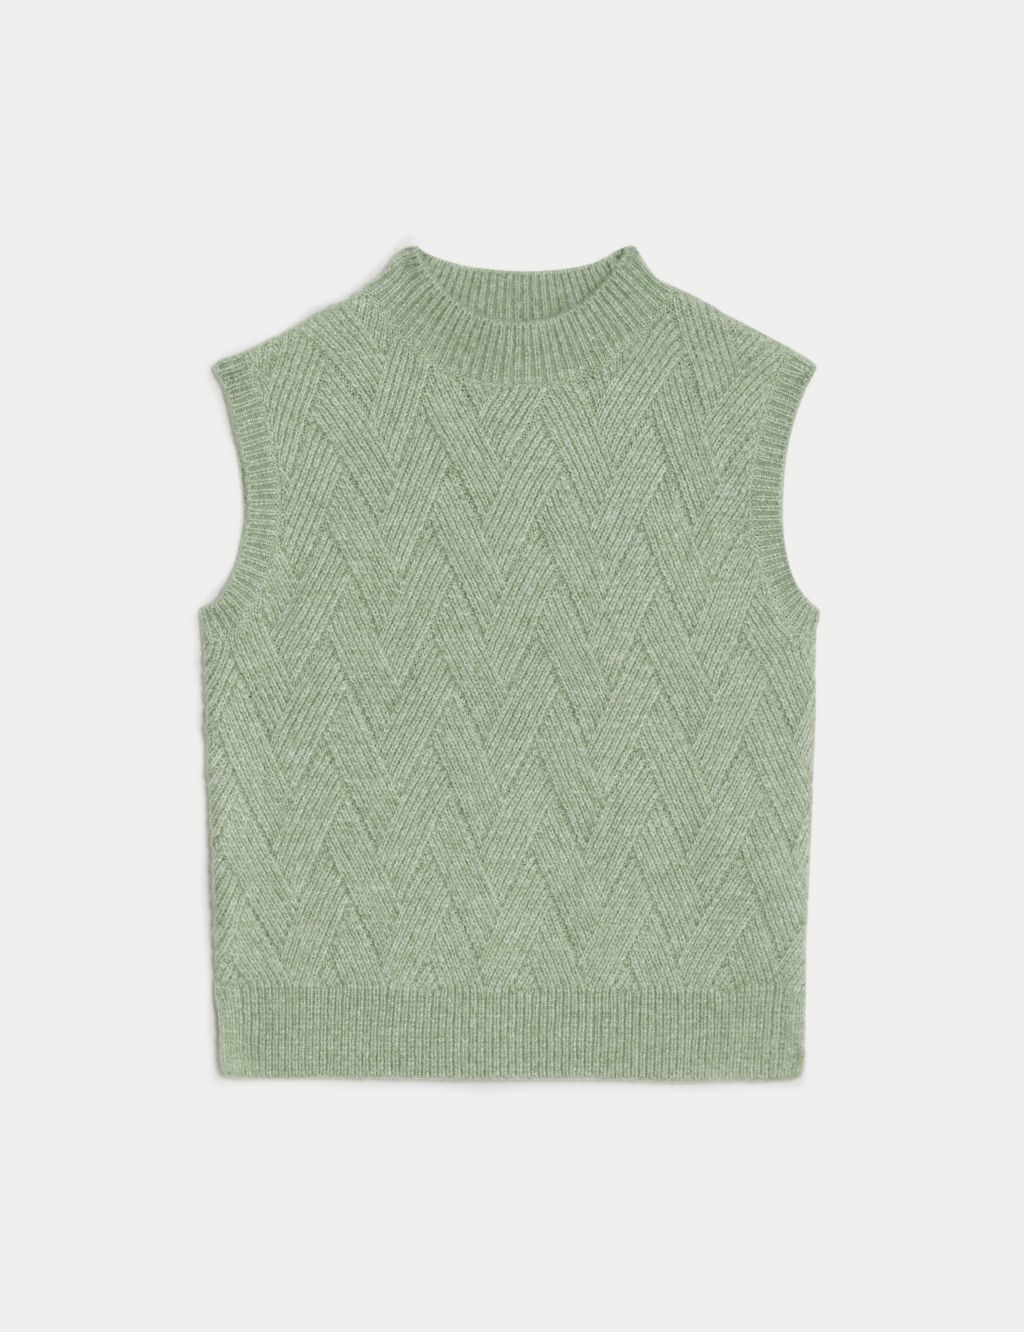 Textured Knitted Vest with Wool image 2